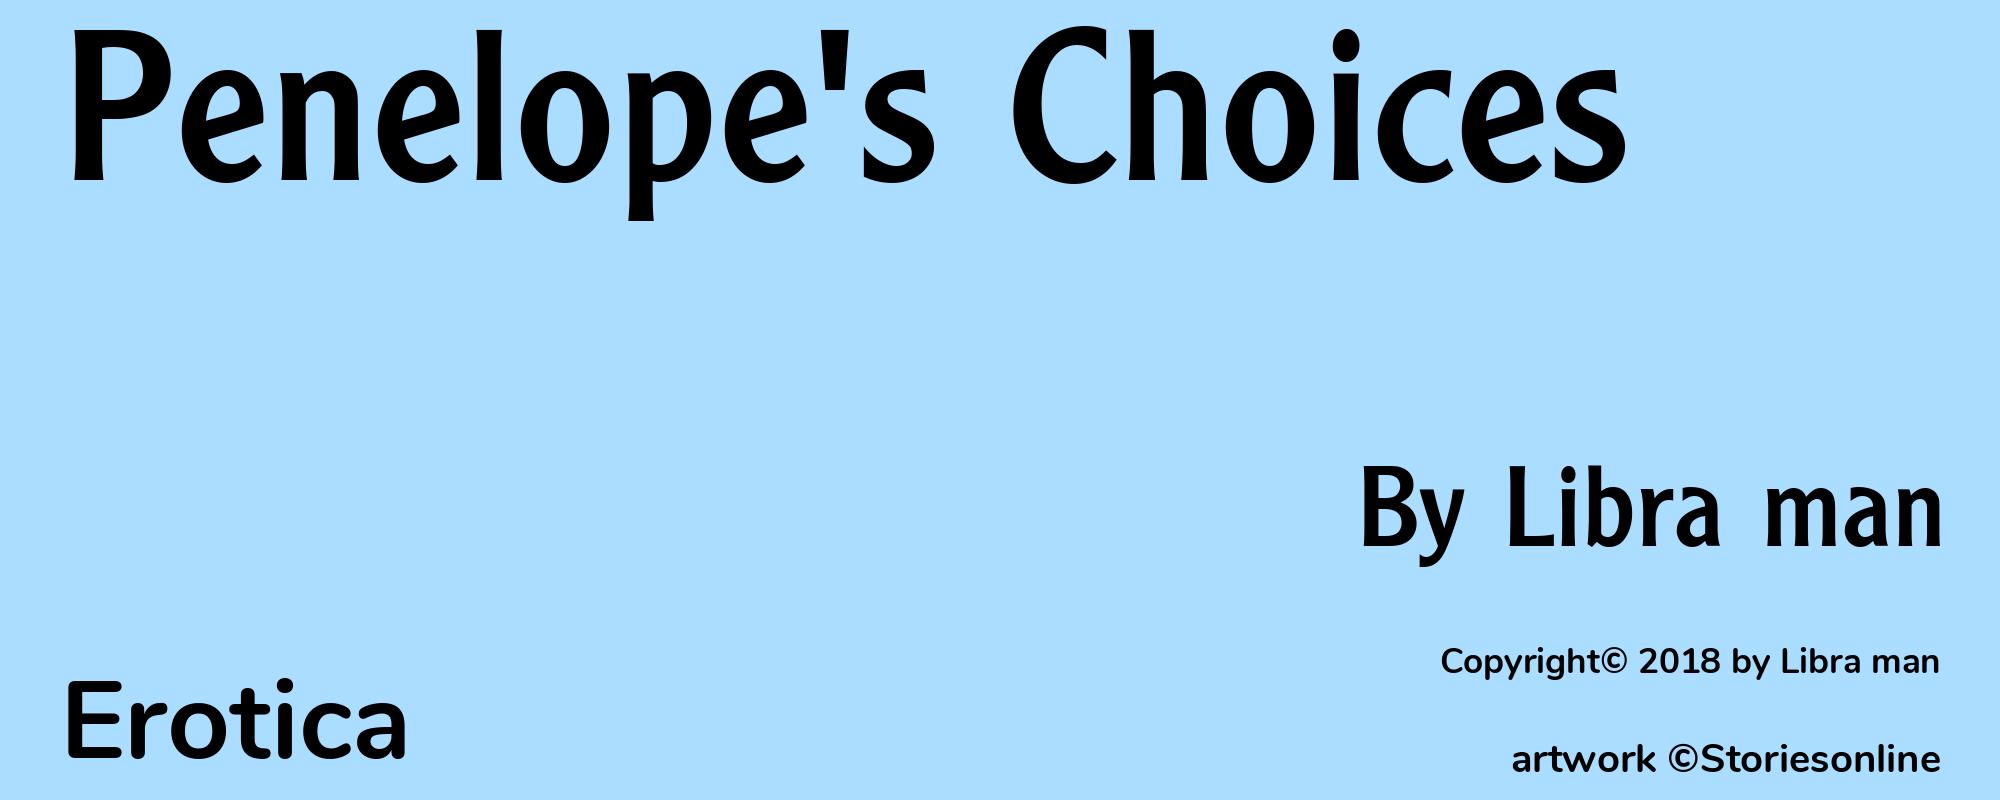 Penelope's Choices - Cover